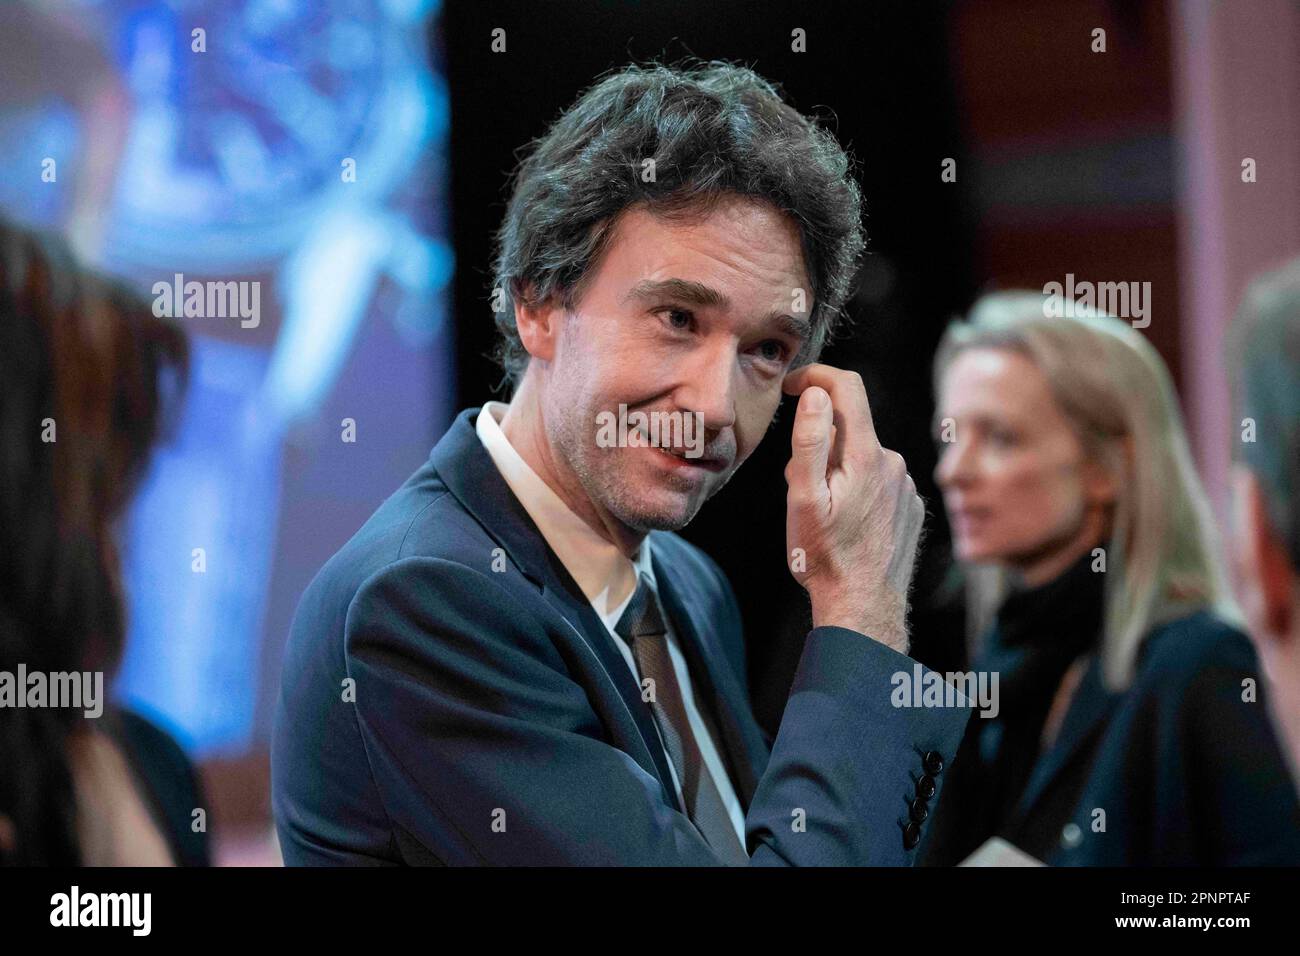 Chairman Ceo French Conglomerate Lvmh Moet Hennessy Louis Vuitton Bernard –  Stock Editorial Photo © ChinaImages #244135364